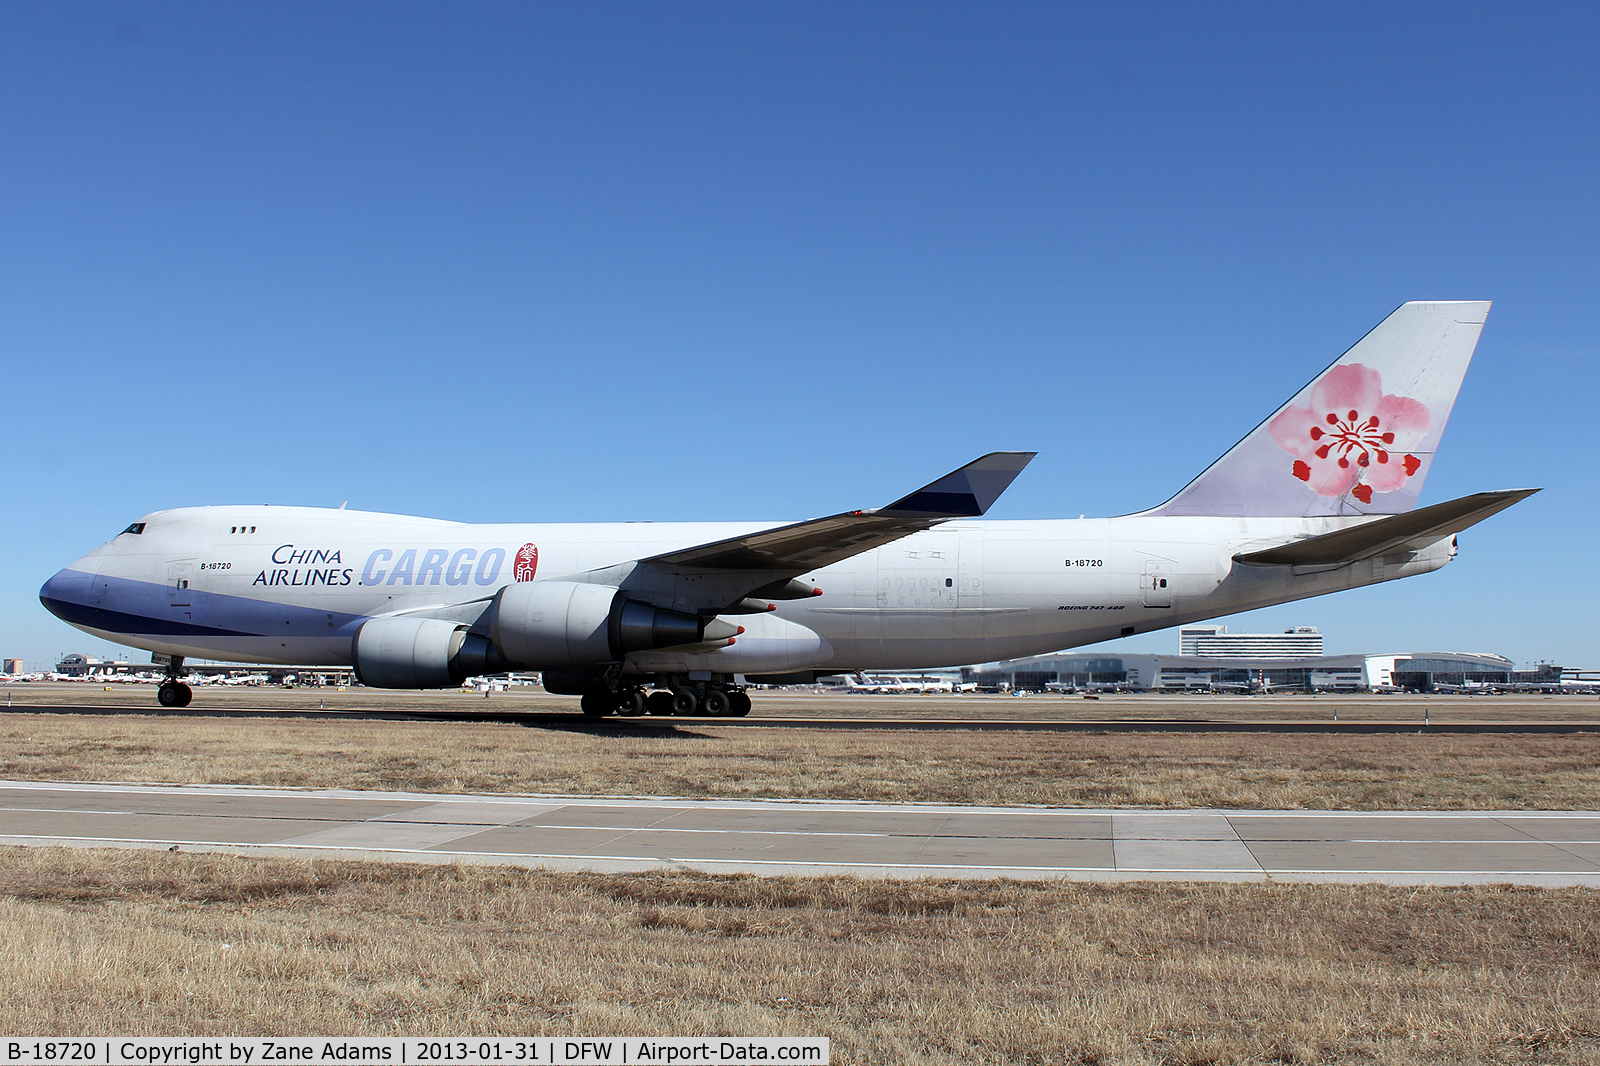 B-18720, 2005 Boeing 747-409F/SCD C/N 33733, China Airlines Cargo at DFW Airport